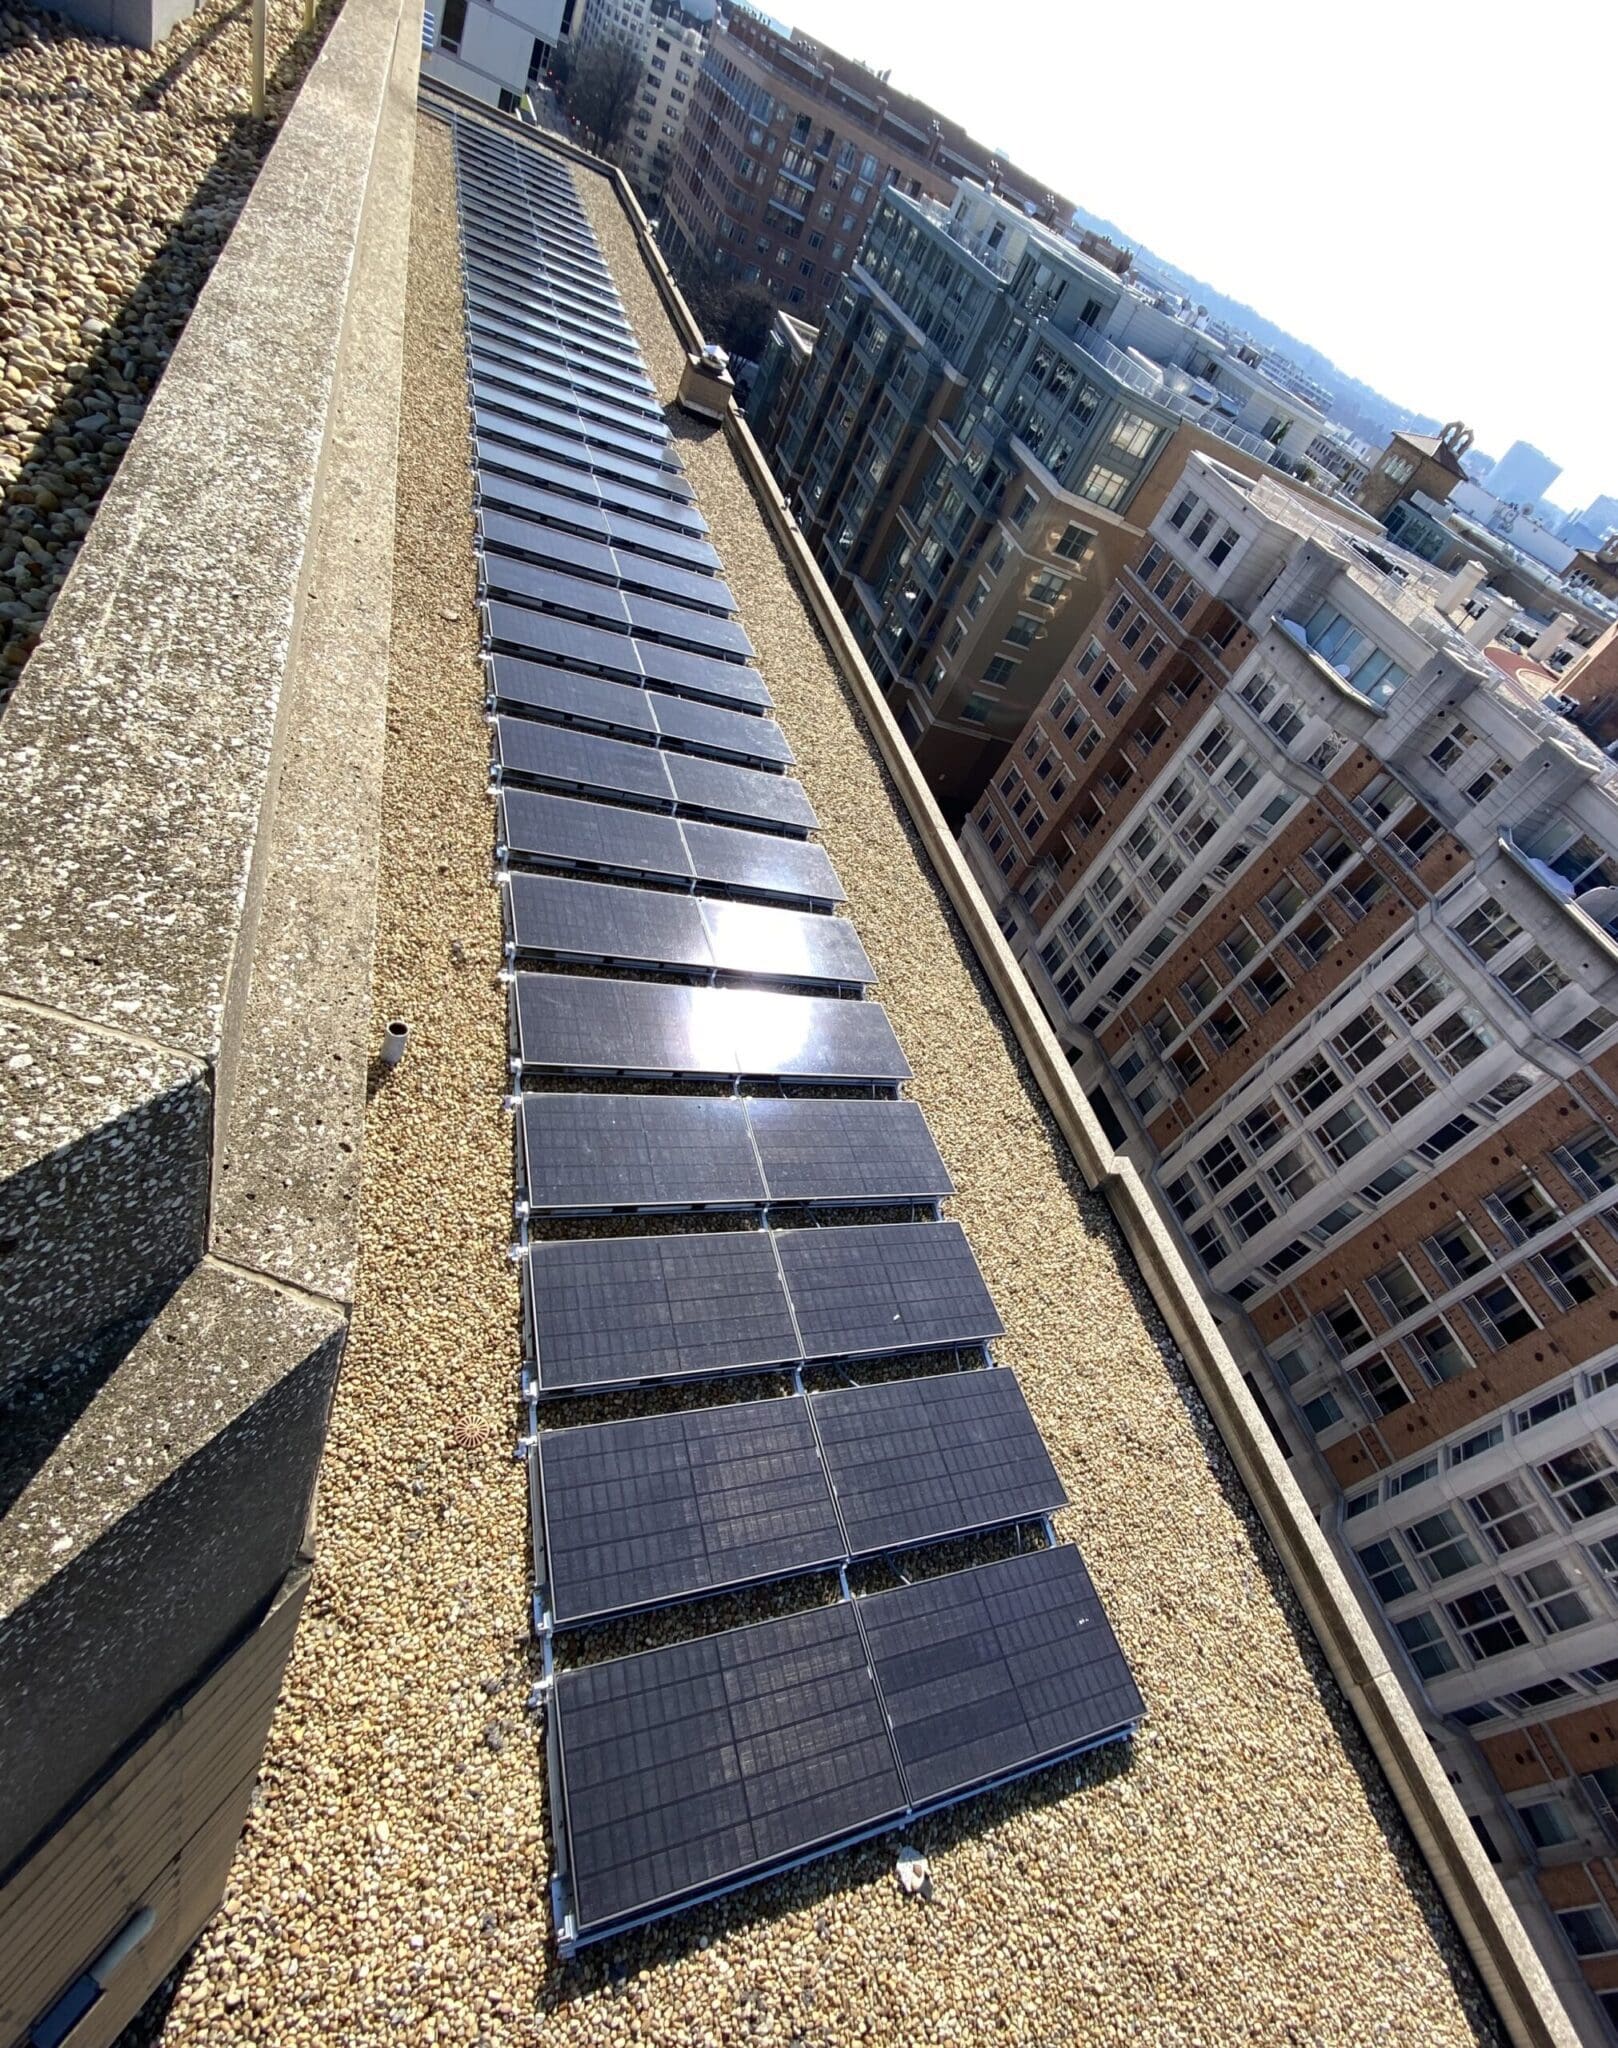 Sun shining on a Georgetown hotel in Washington DC with a rooftop solar array